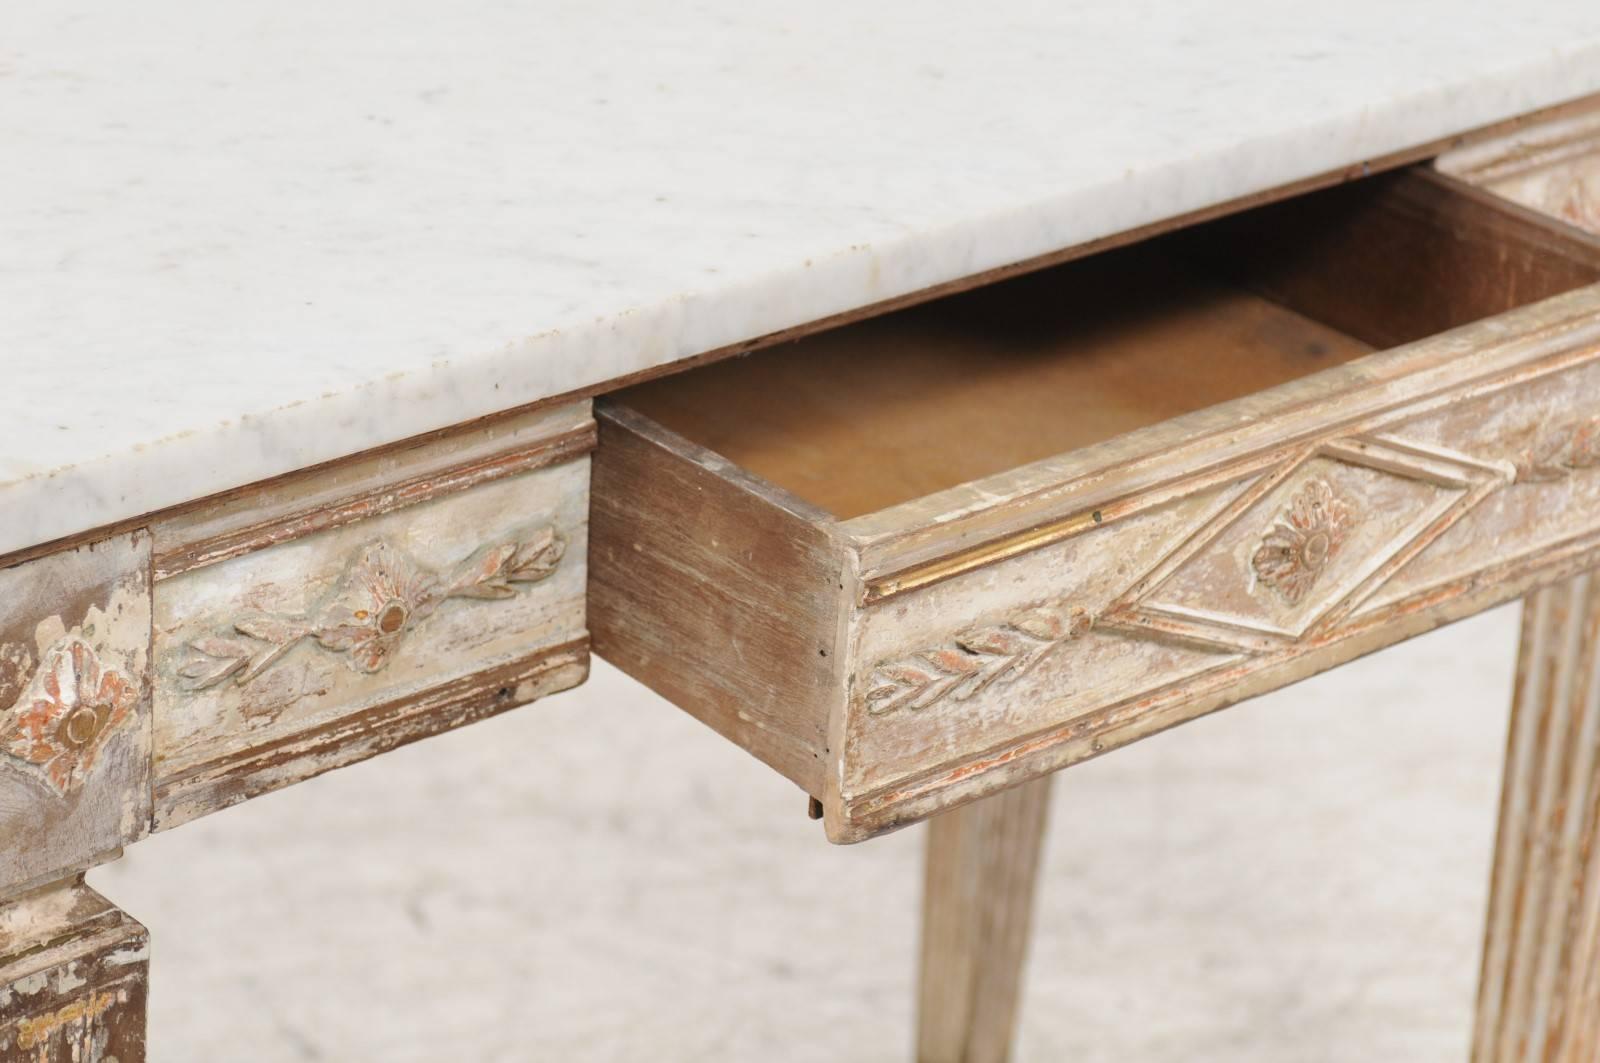 19th Century Swedish Neoclassical Style Console Table with White Marble Top, circa 1870